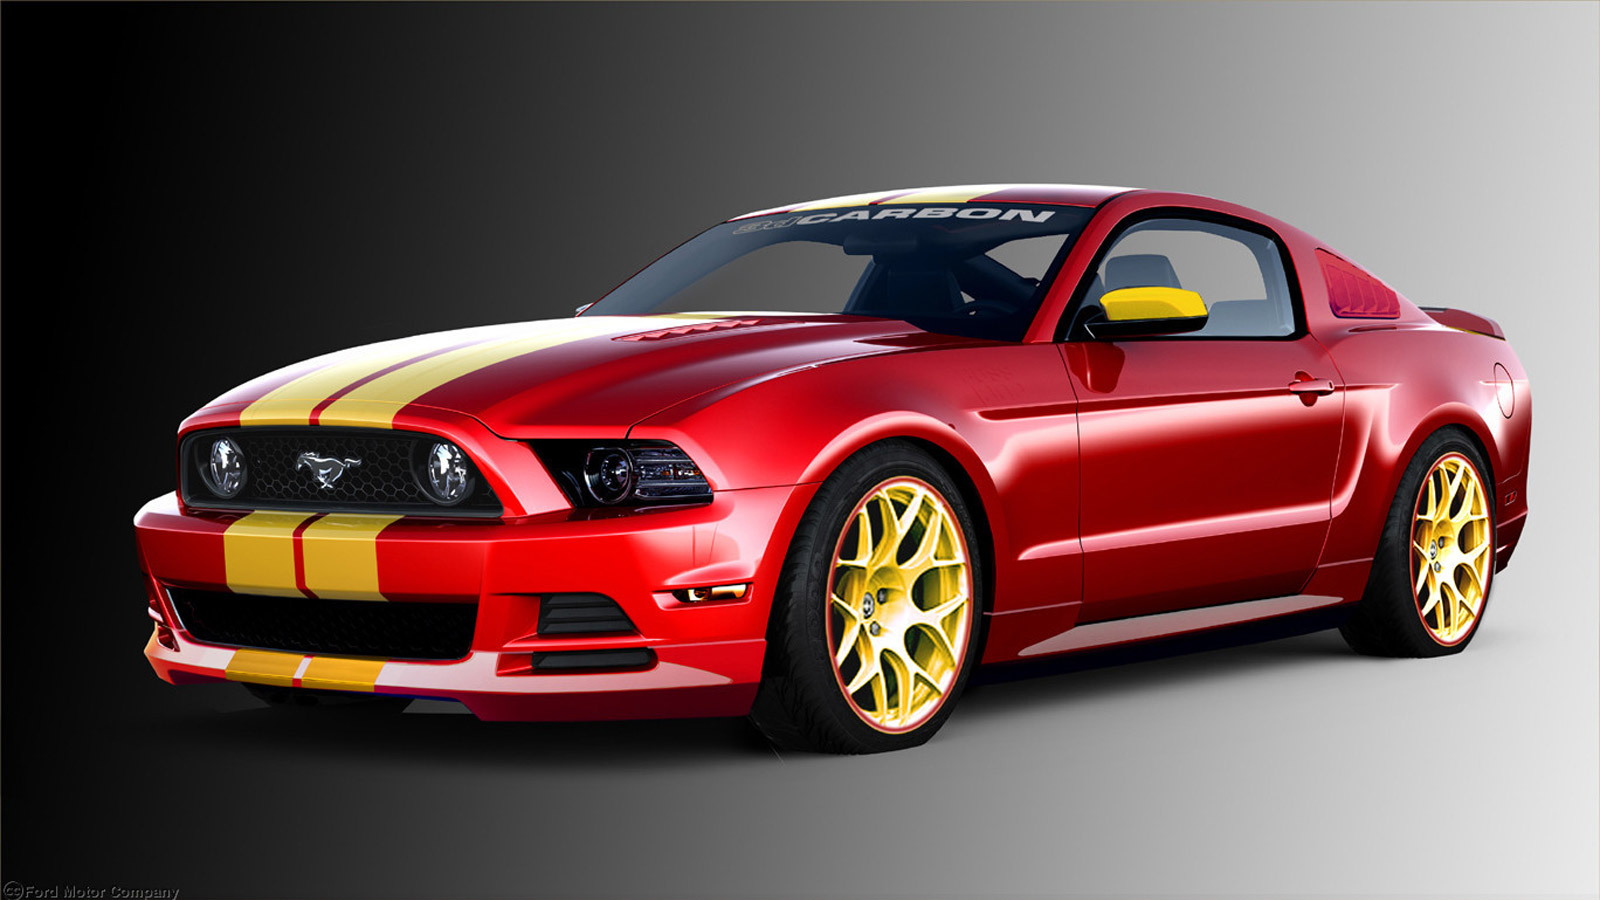 2013 Ford Mustang ‘Boy Racer’ - Built by 3dCarbon